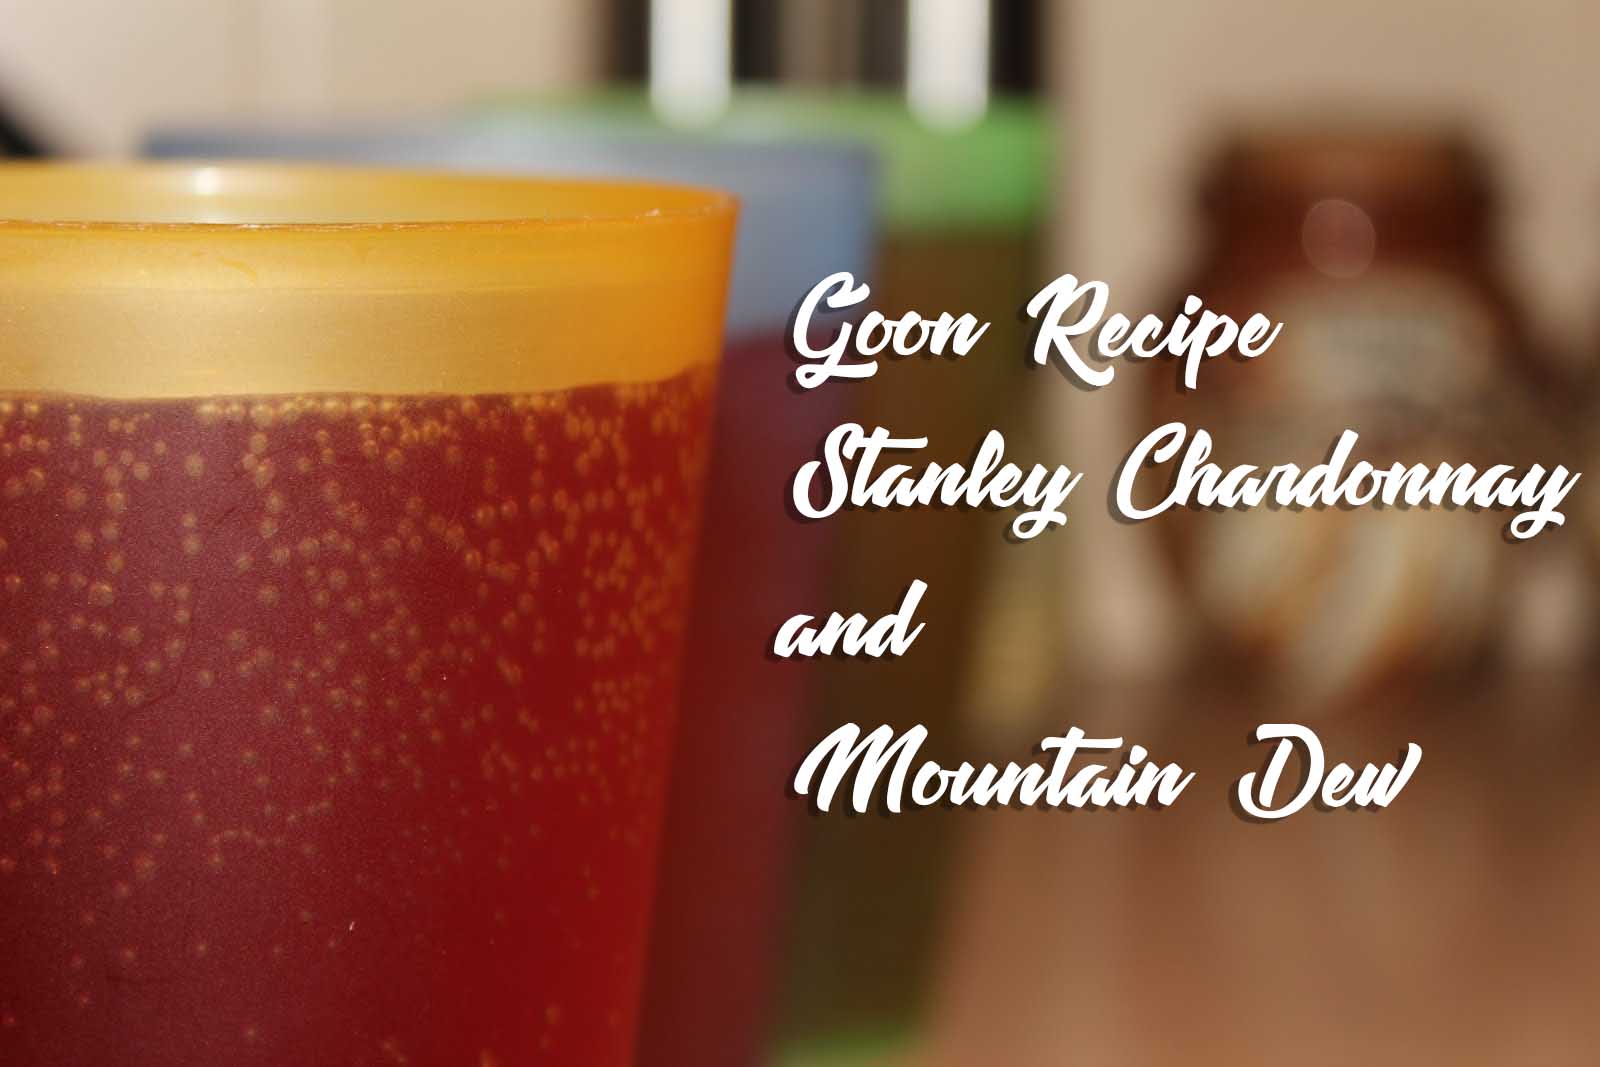 Cups_with_goon_Stanley_Chardonnay_and_Mountain_Dew_Goon_Recipe